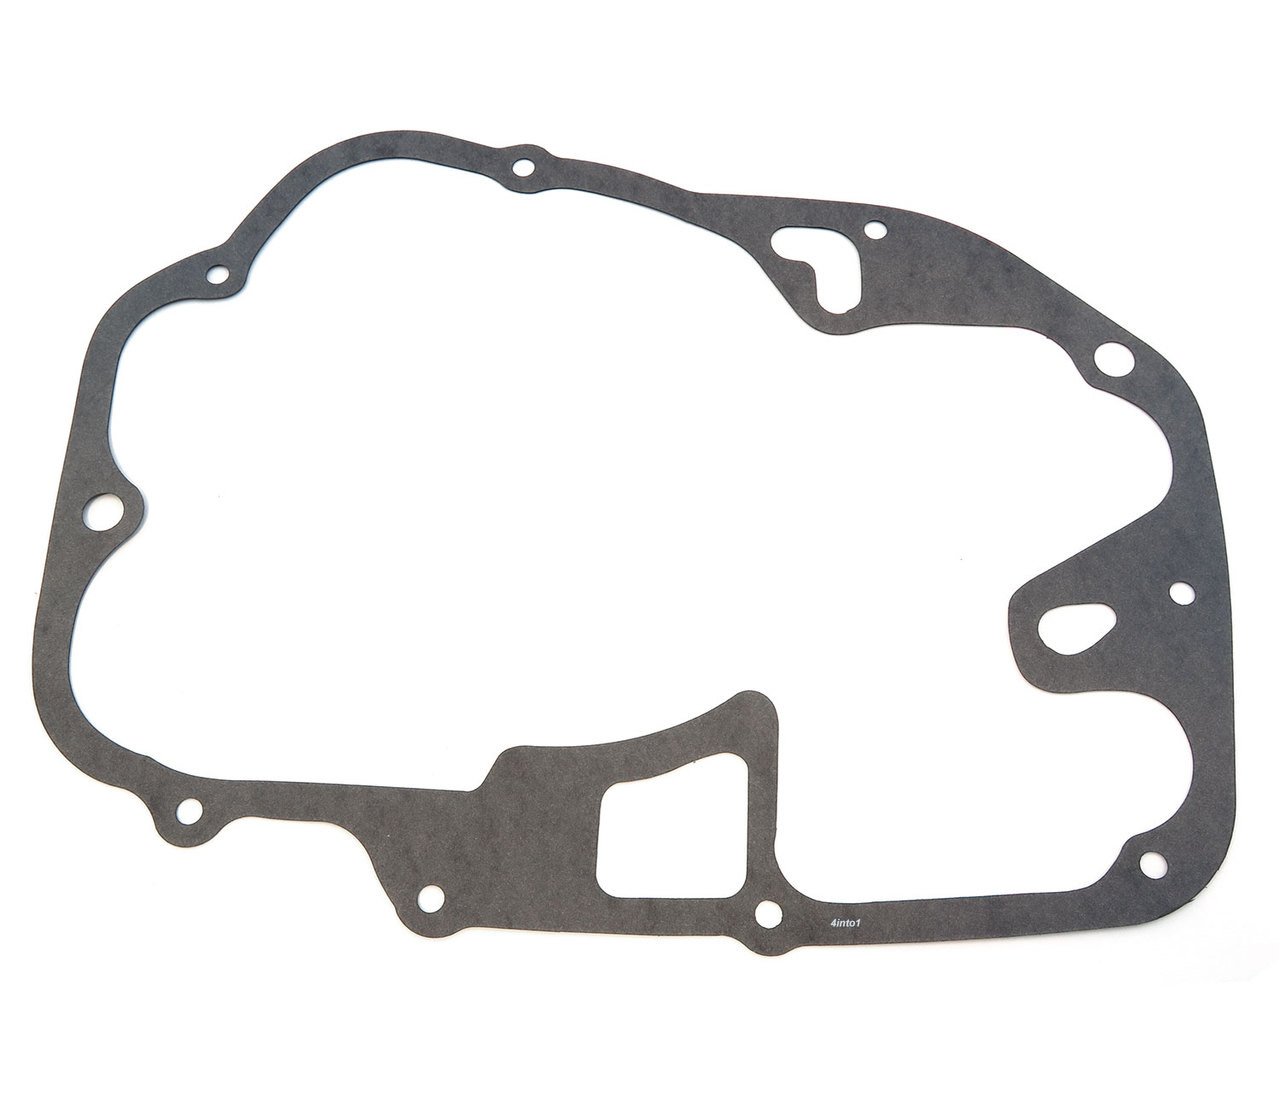 Details about  / Clutch Cover Gasket for Honda Motorcycles